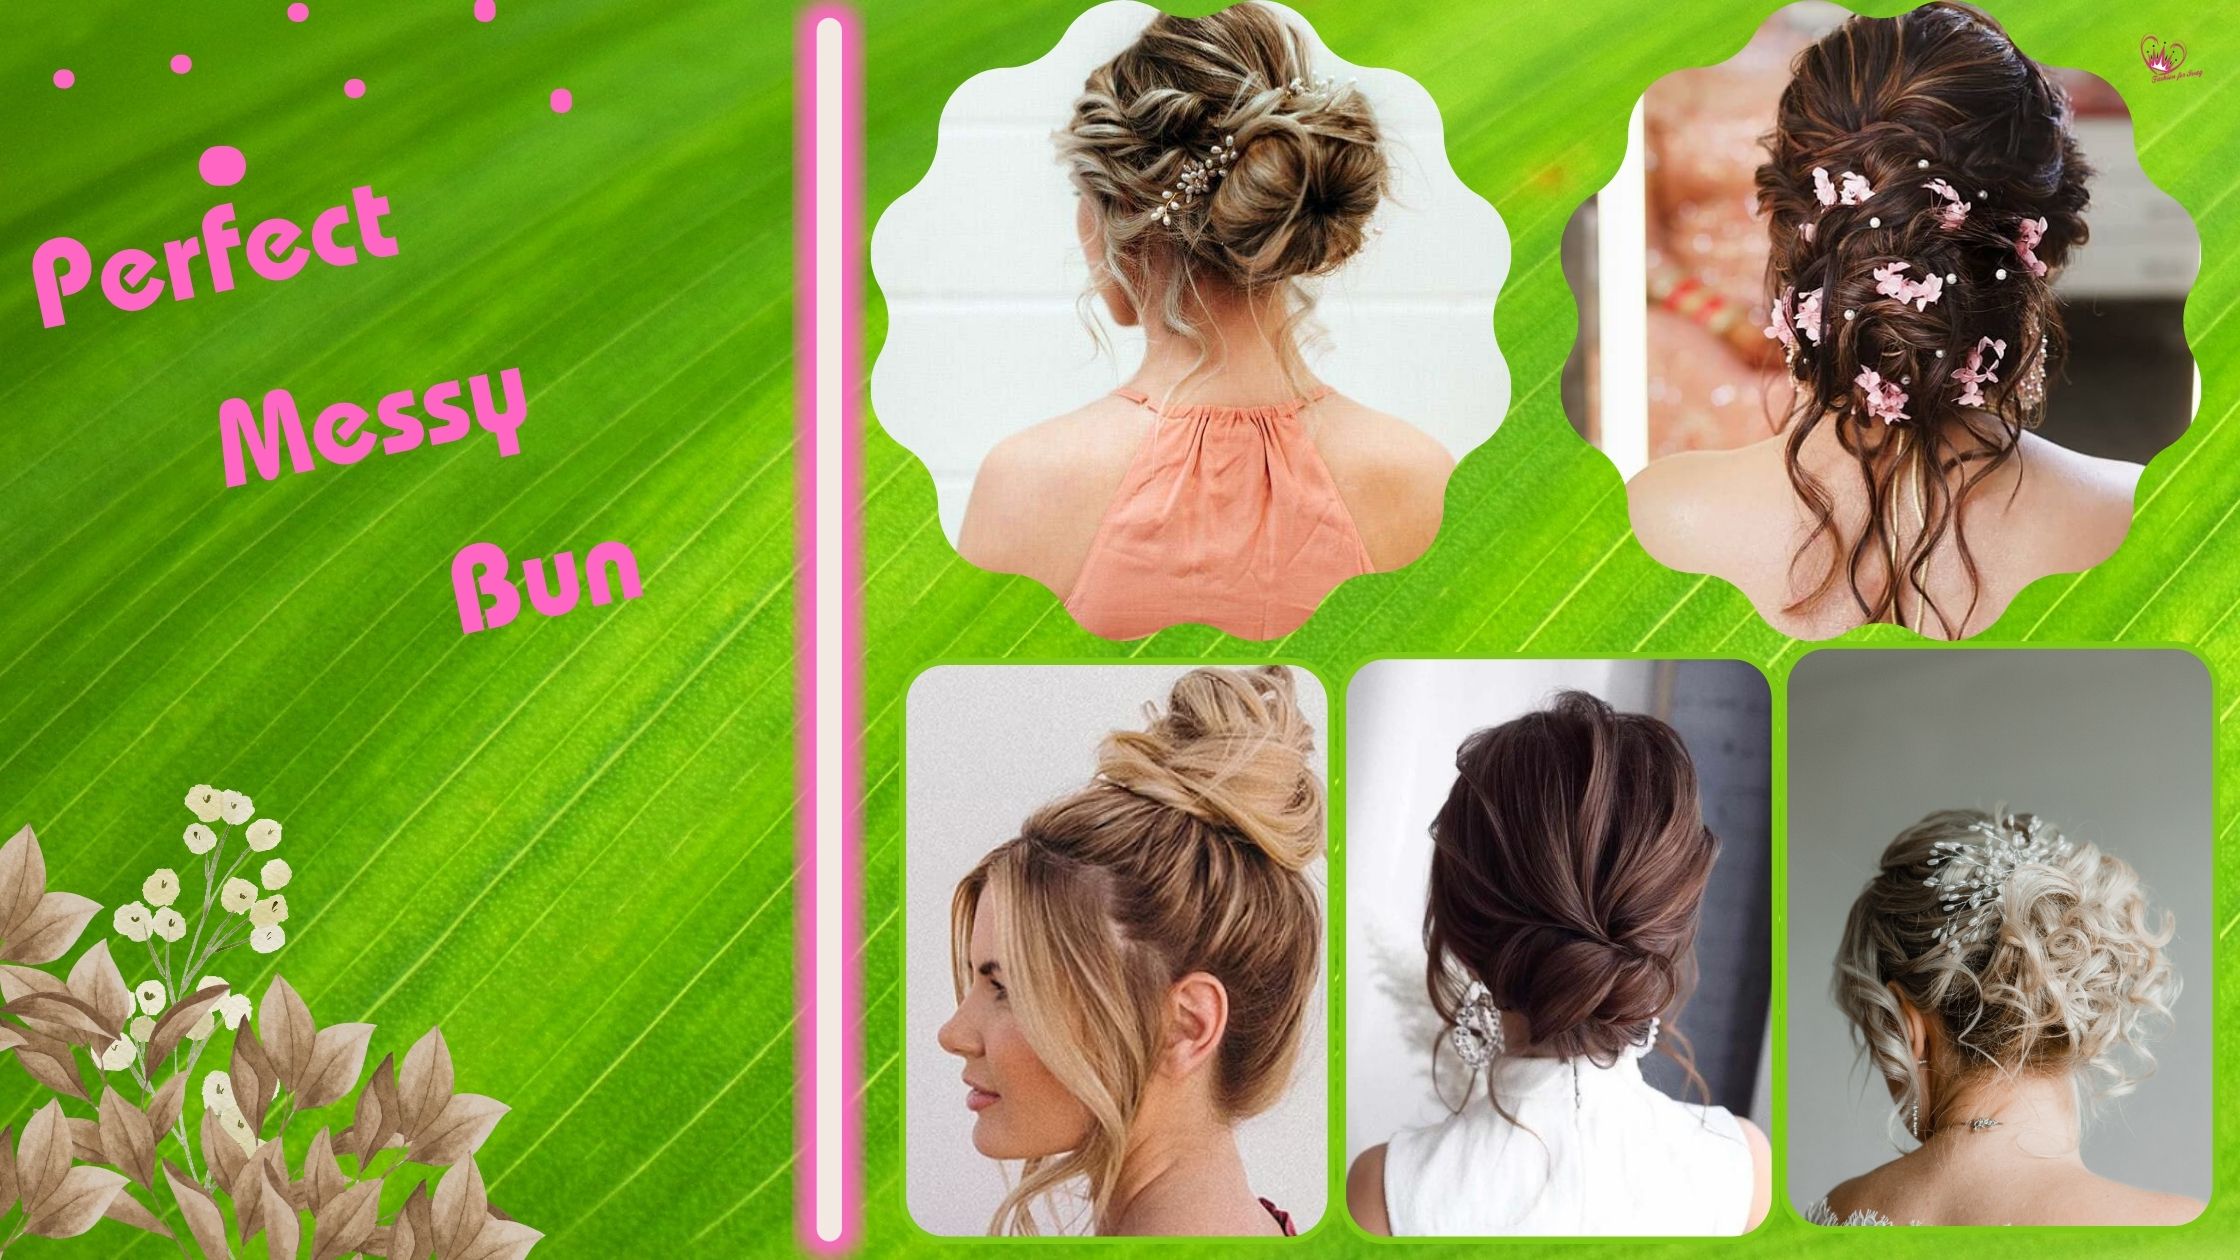 10 Creative Ideas for the Perfect Messy Bun